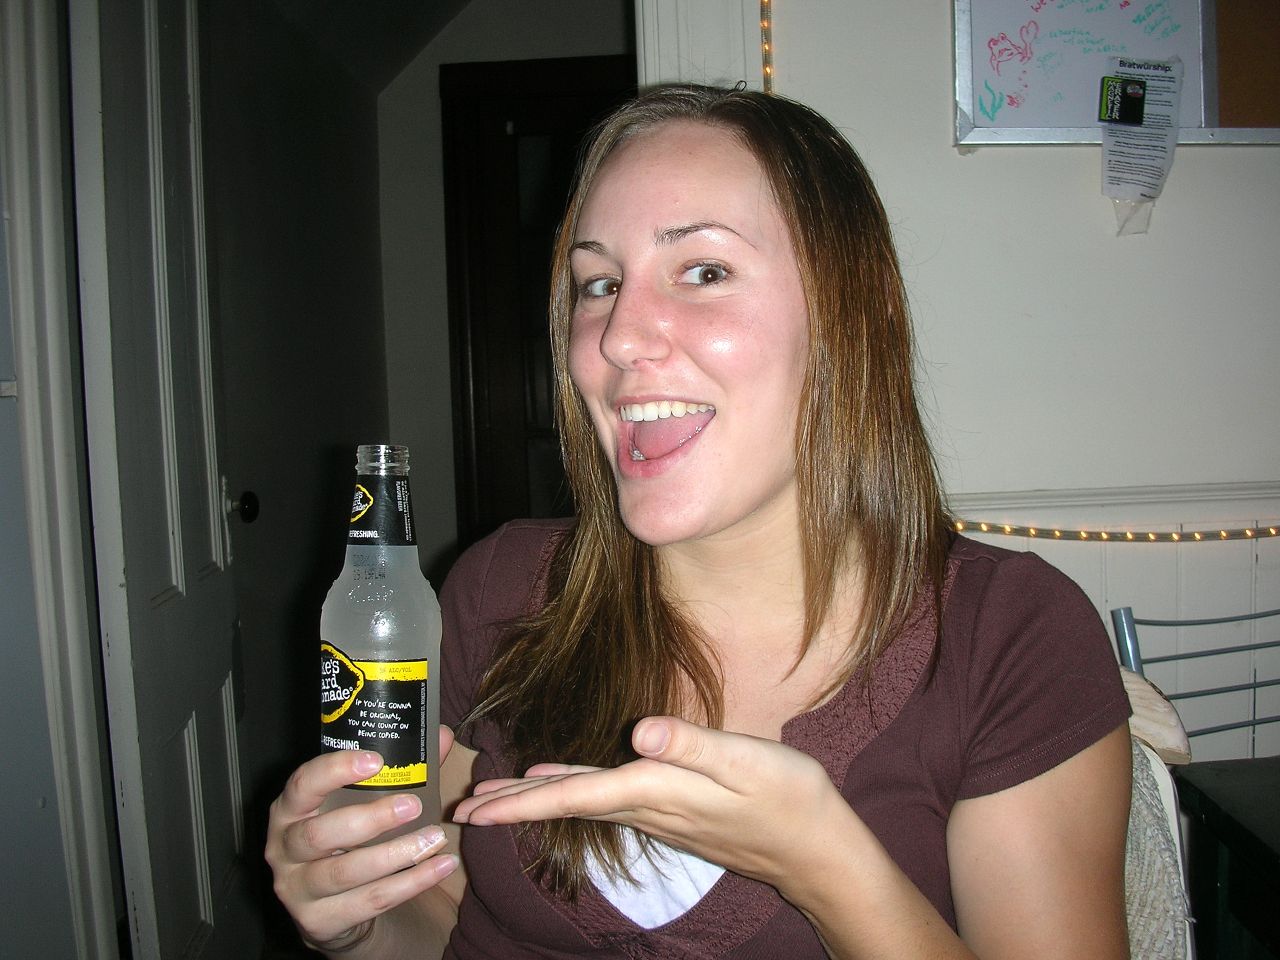 woman smiling while holding a bottle of beer